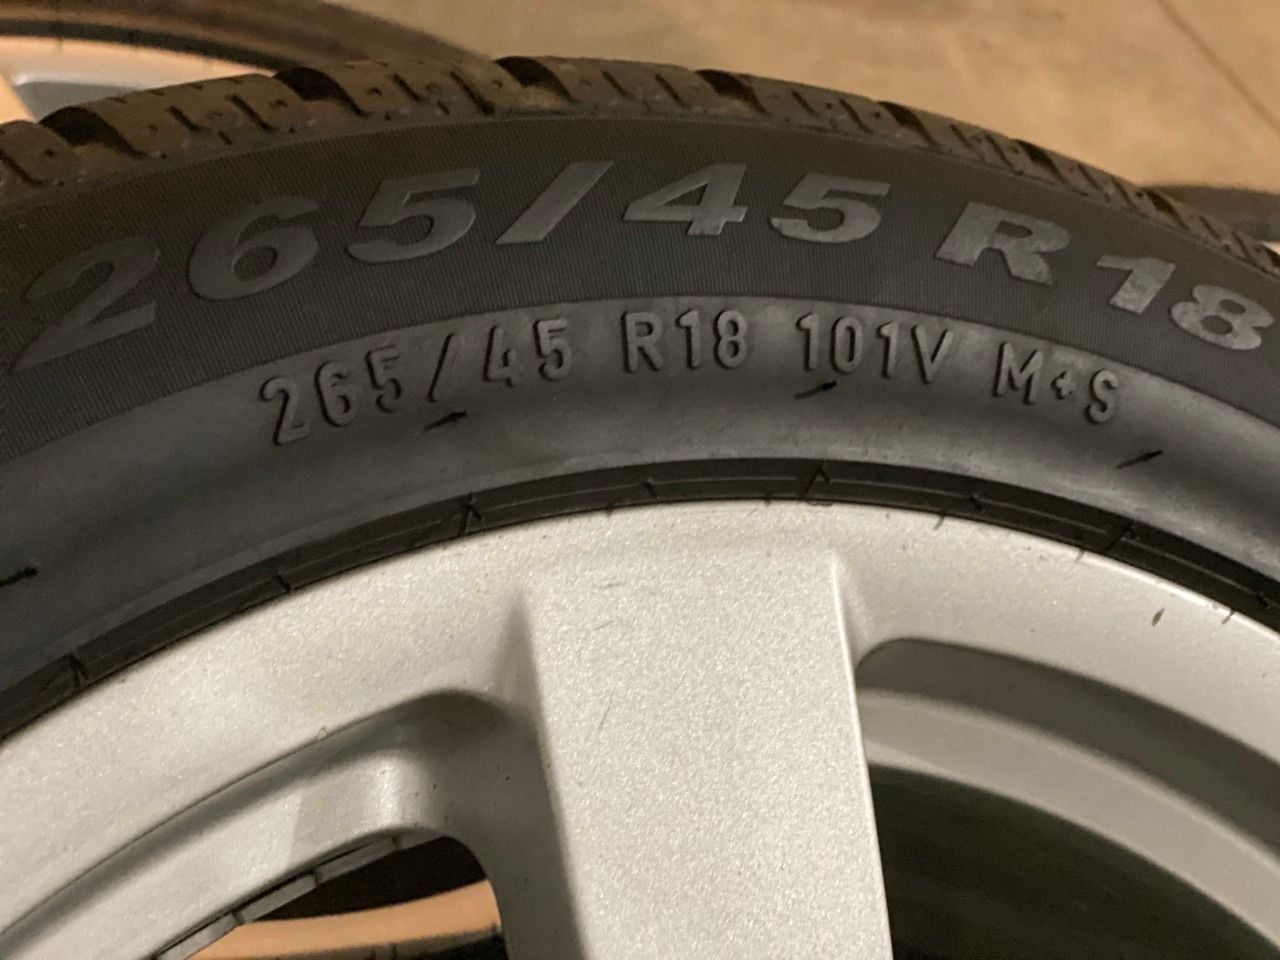 Wheels and Tires/Axles - Cayman/Boxster Winter Tires & Wheels - Used - Cambridge, ON N1R7V2, Canada